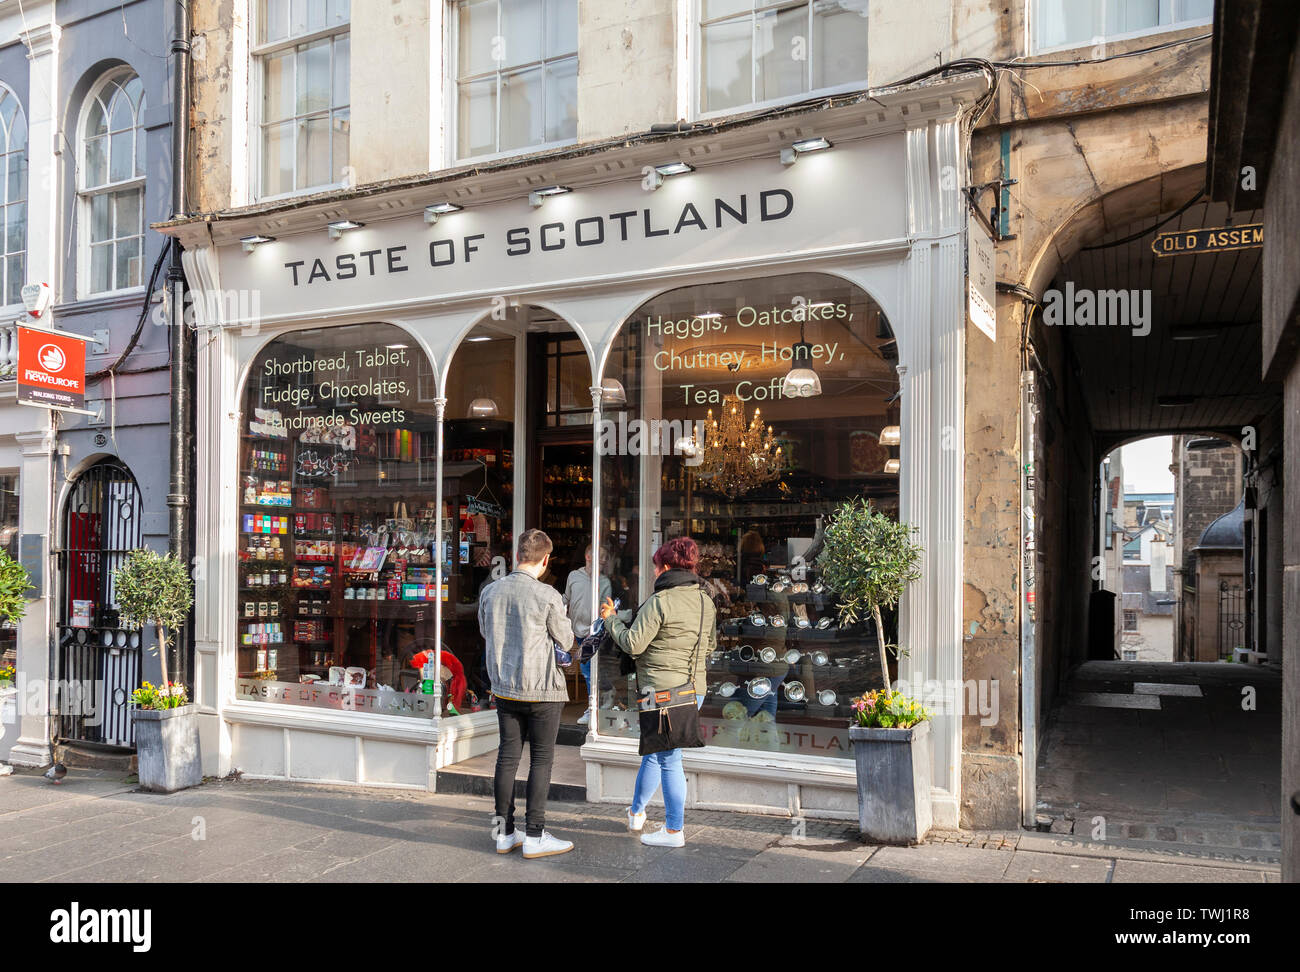 Customers inside and outside the Taste of Scotland shop next to Old Assembly Close in the Royal Mile / High Street, Edinburgh, Scotland, UK Stock Photo